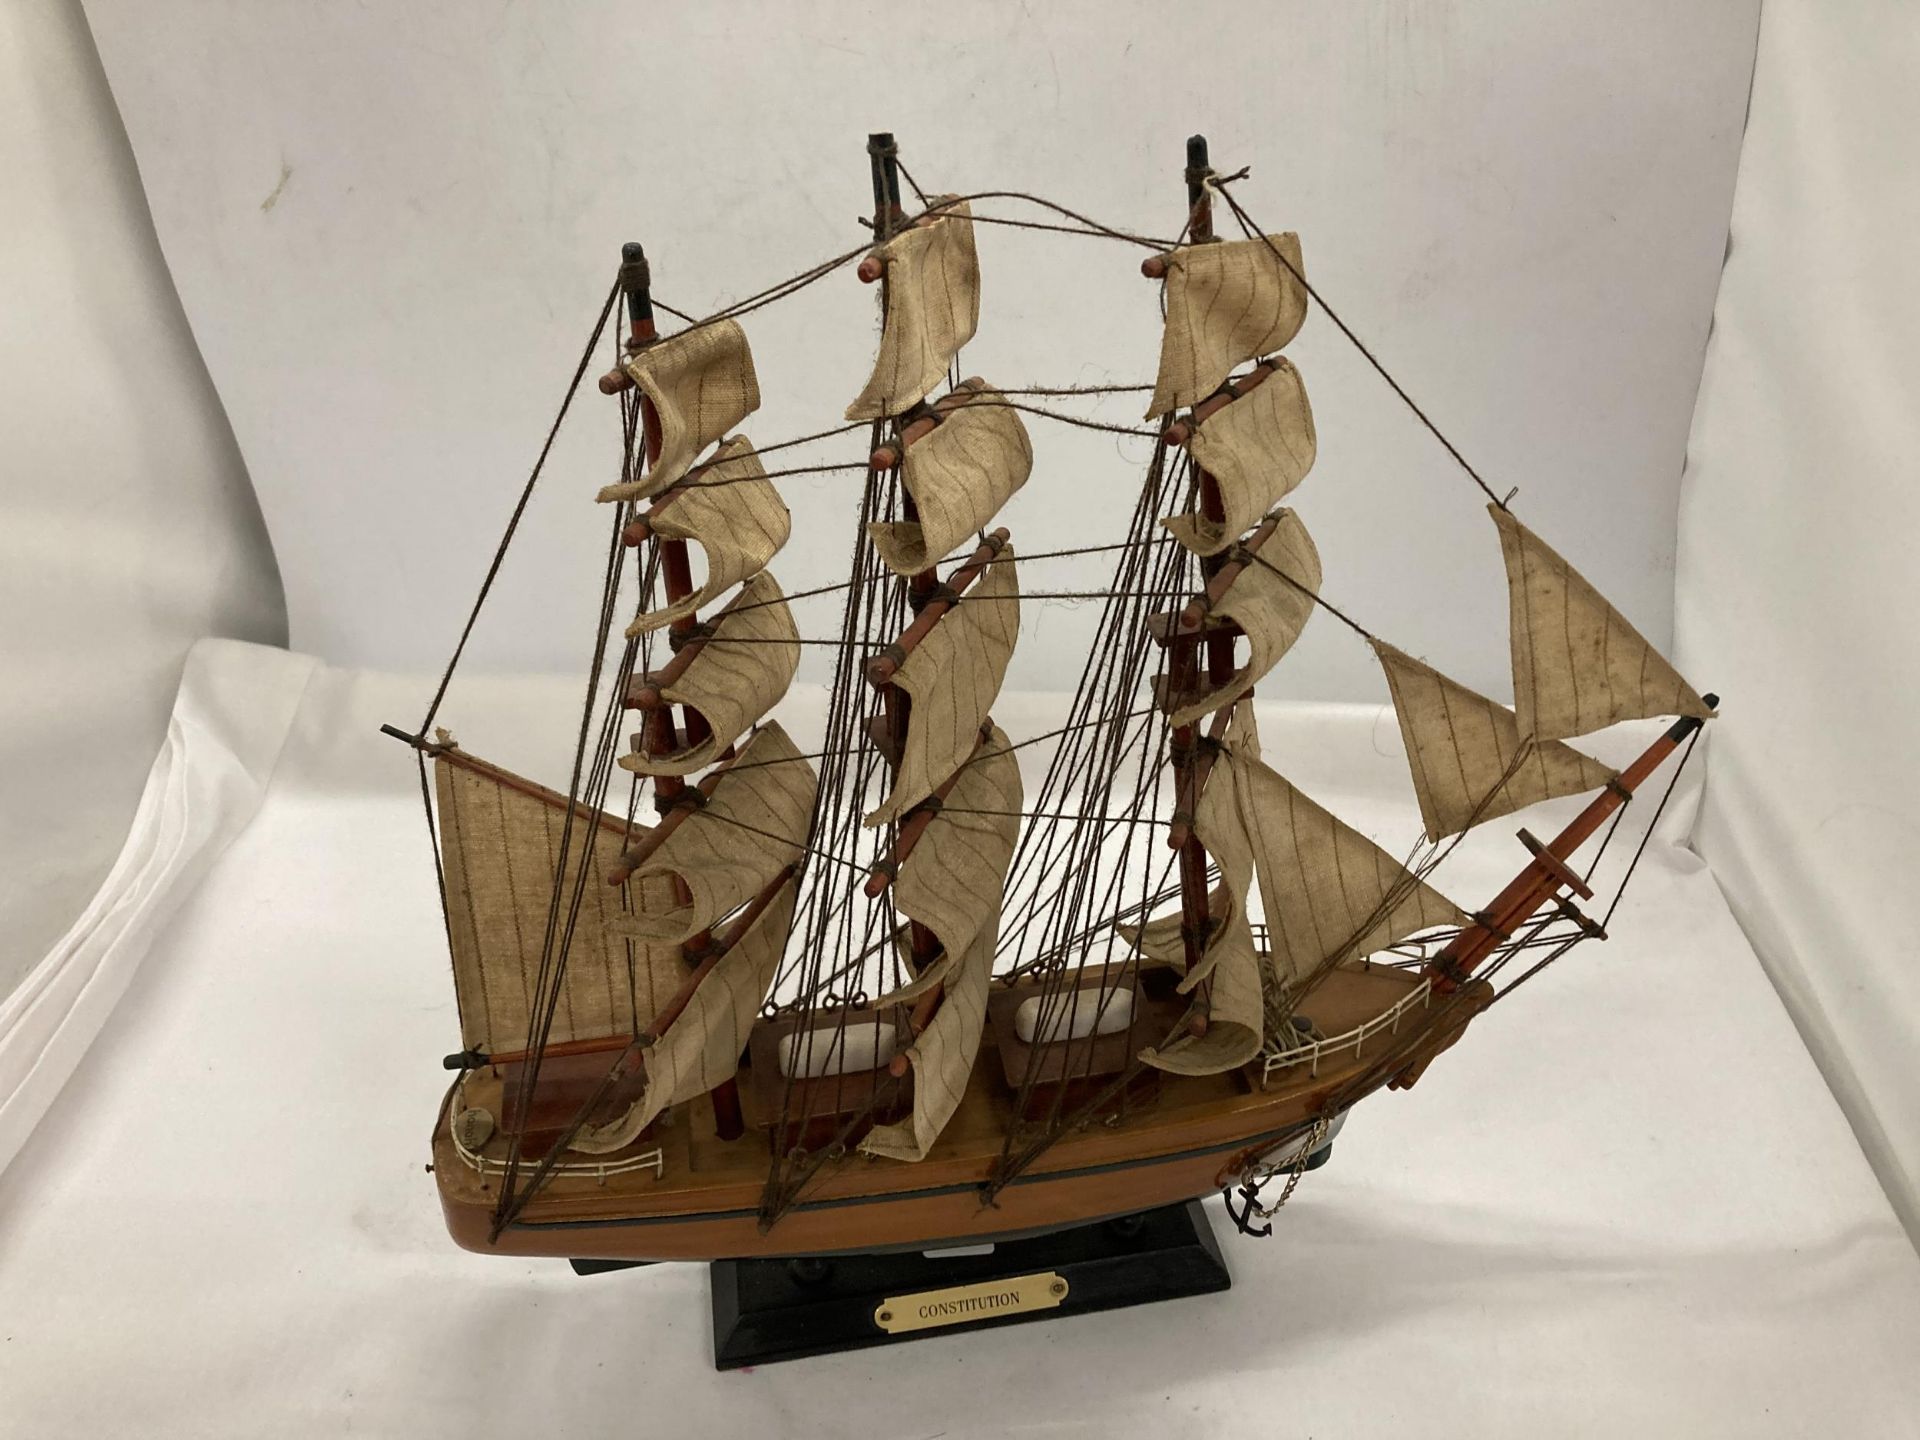 TWO WOODEN MODELS OF SAILING SHIPS, HEIGHTS 45CM AND 35CM, LENGTHS 51CM AND 35CM - Image 6 of 7